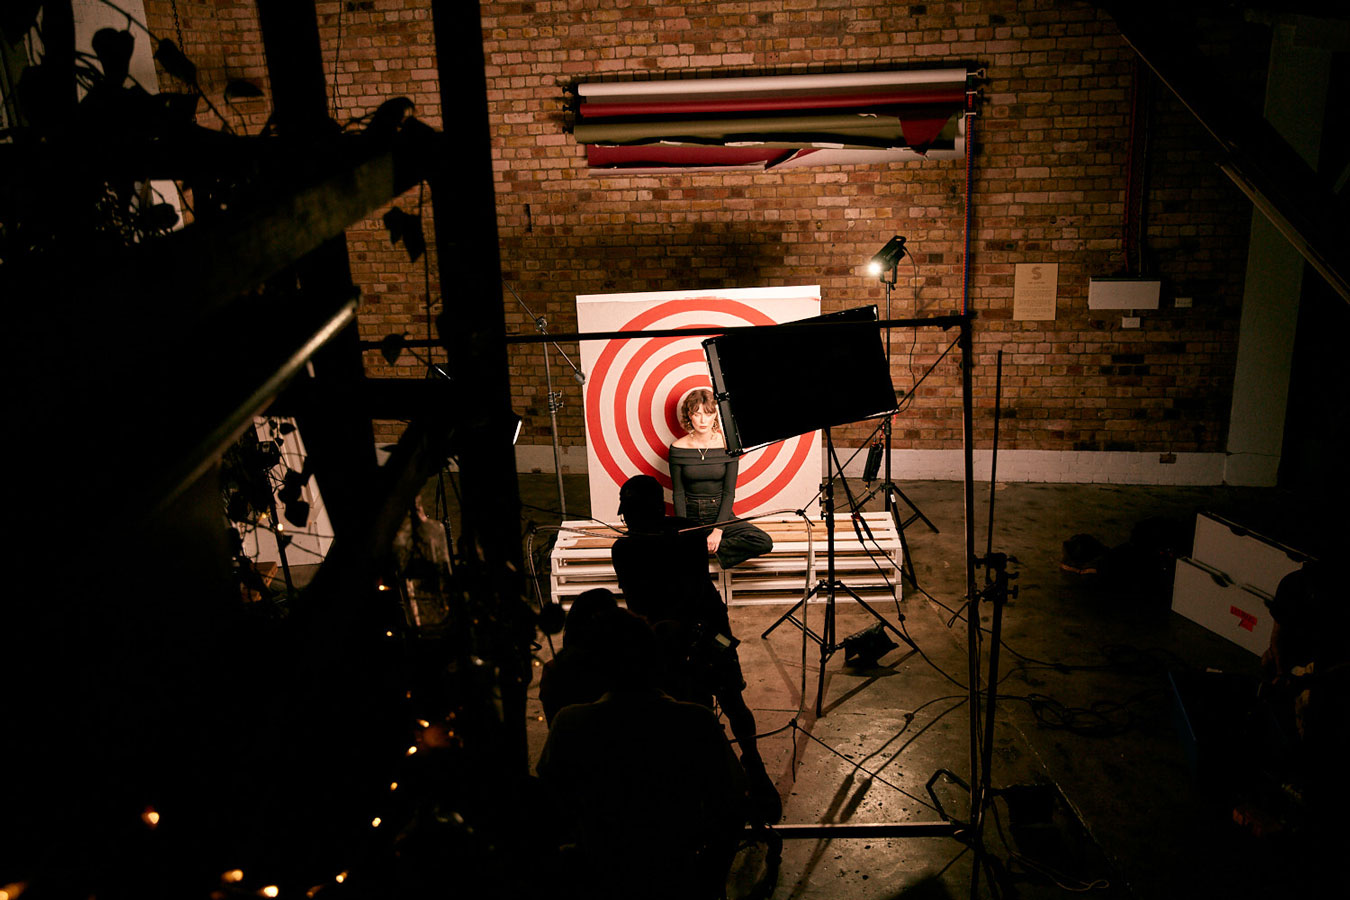 nehind-the-scenes-on-film-clip-shoot-woman-among-lighting-in-foront-of-a-target